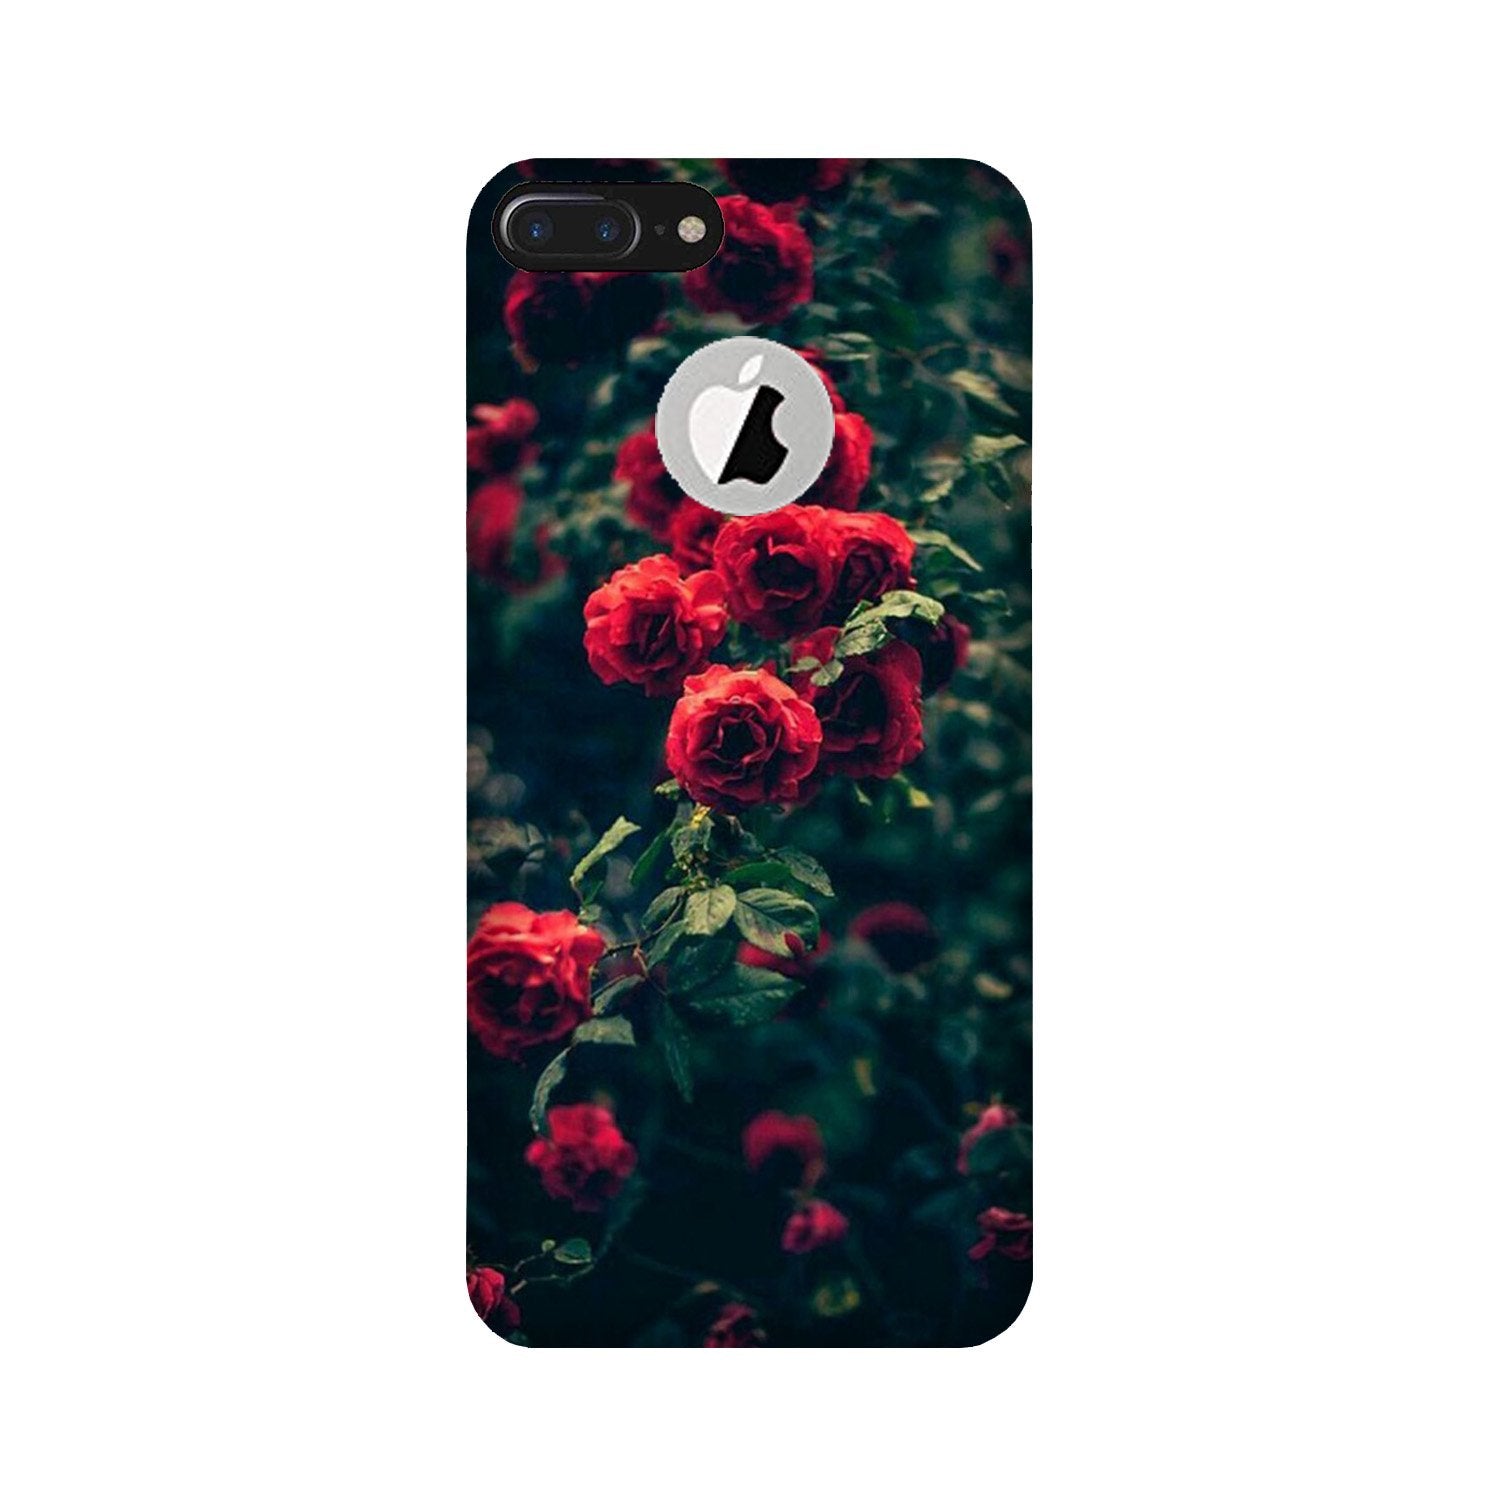 Red Rose Case for iPhone 7 Plus logo cut